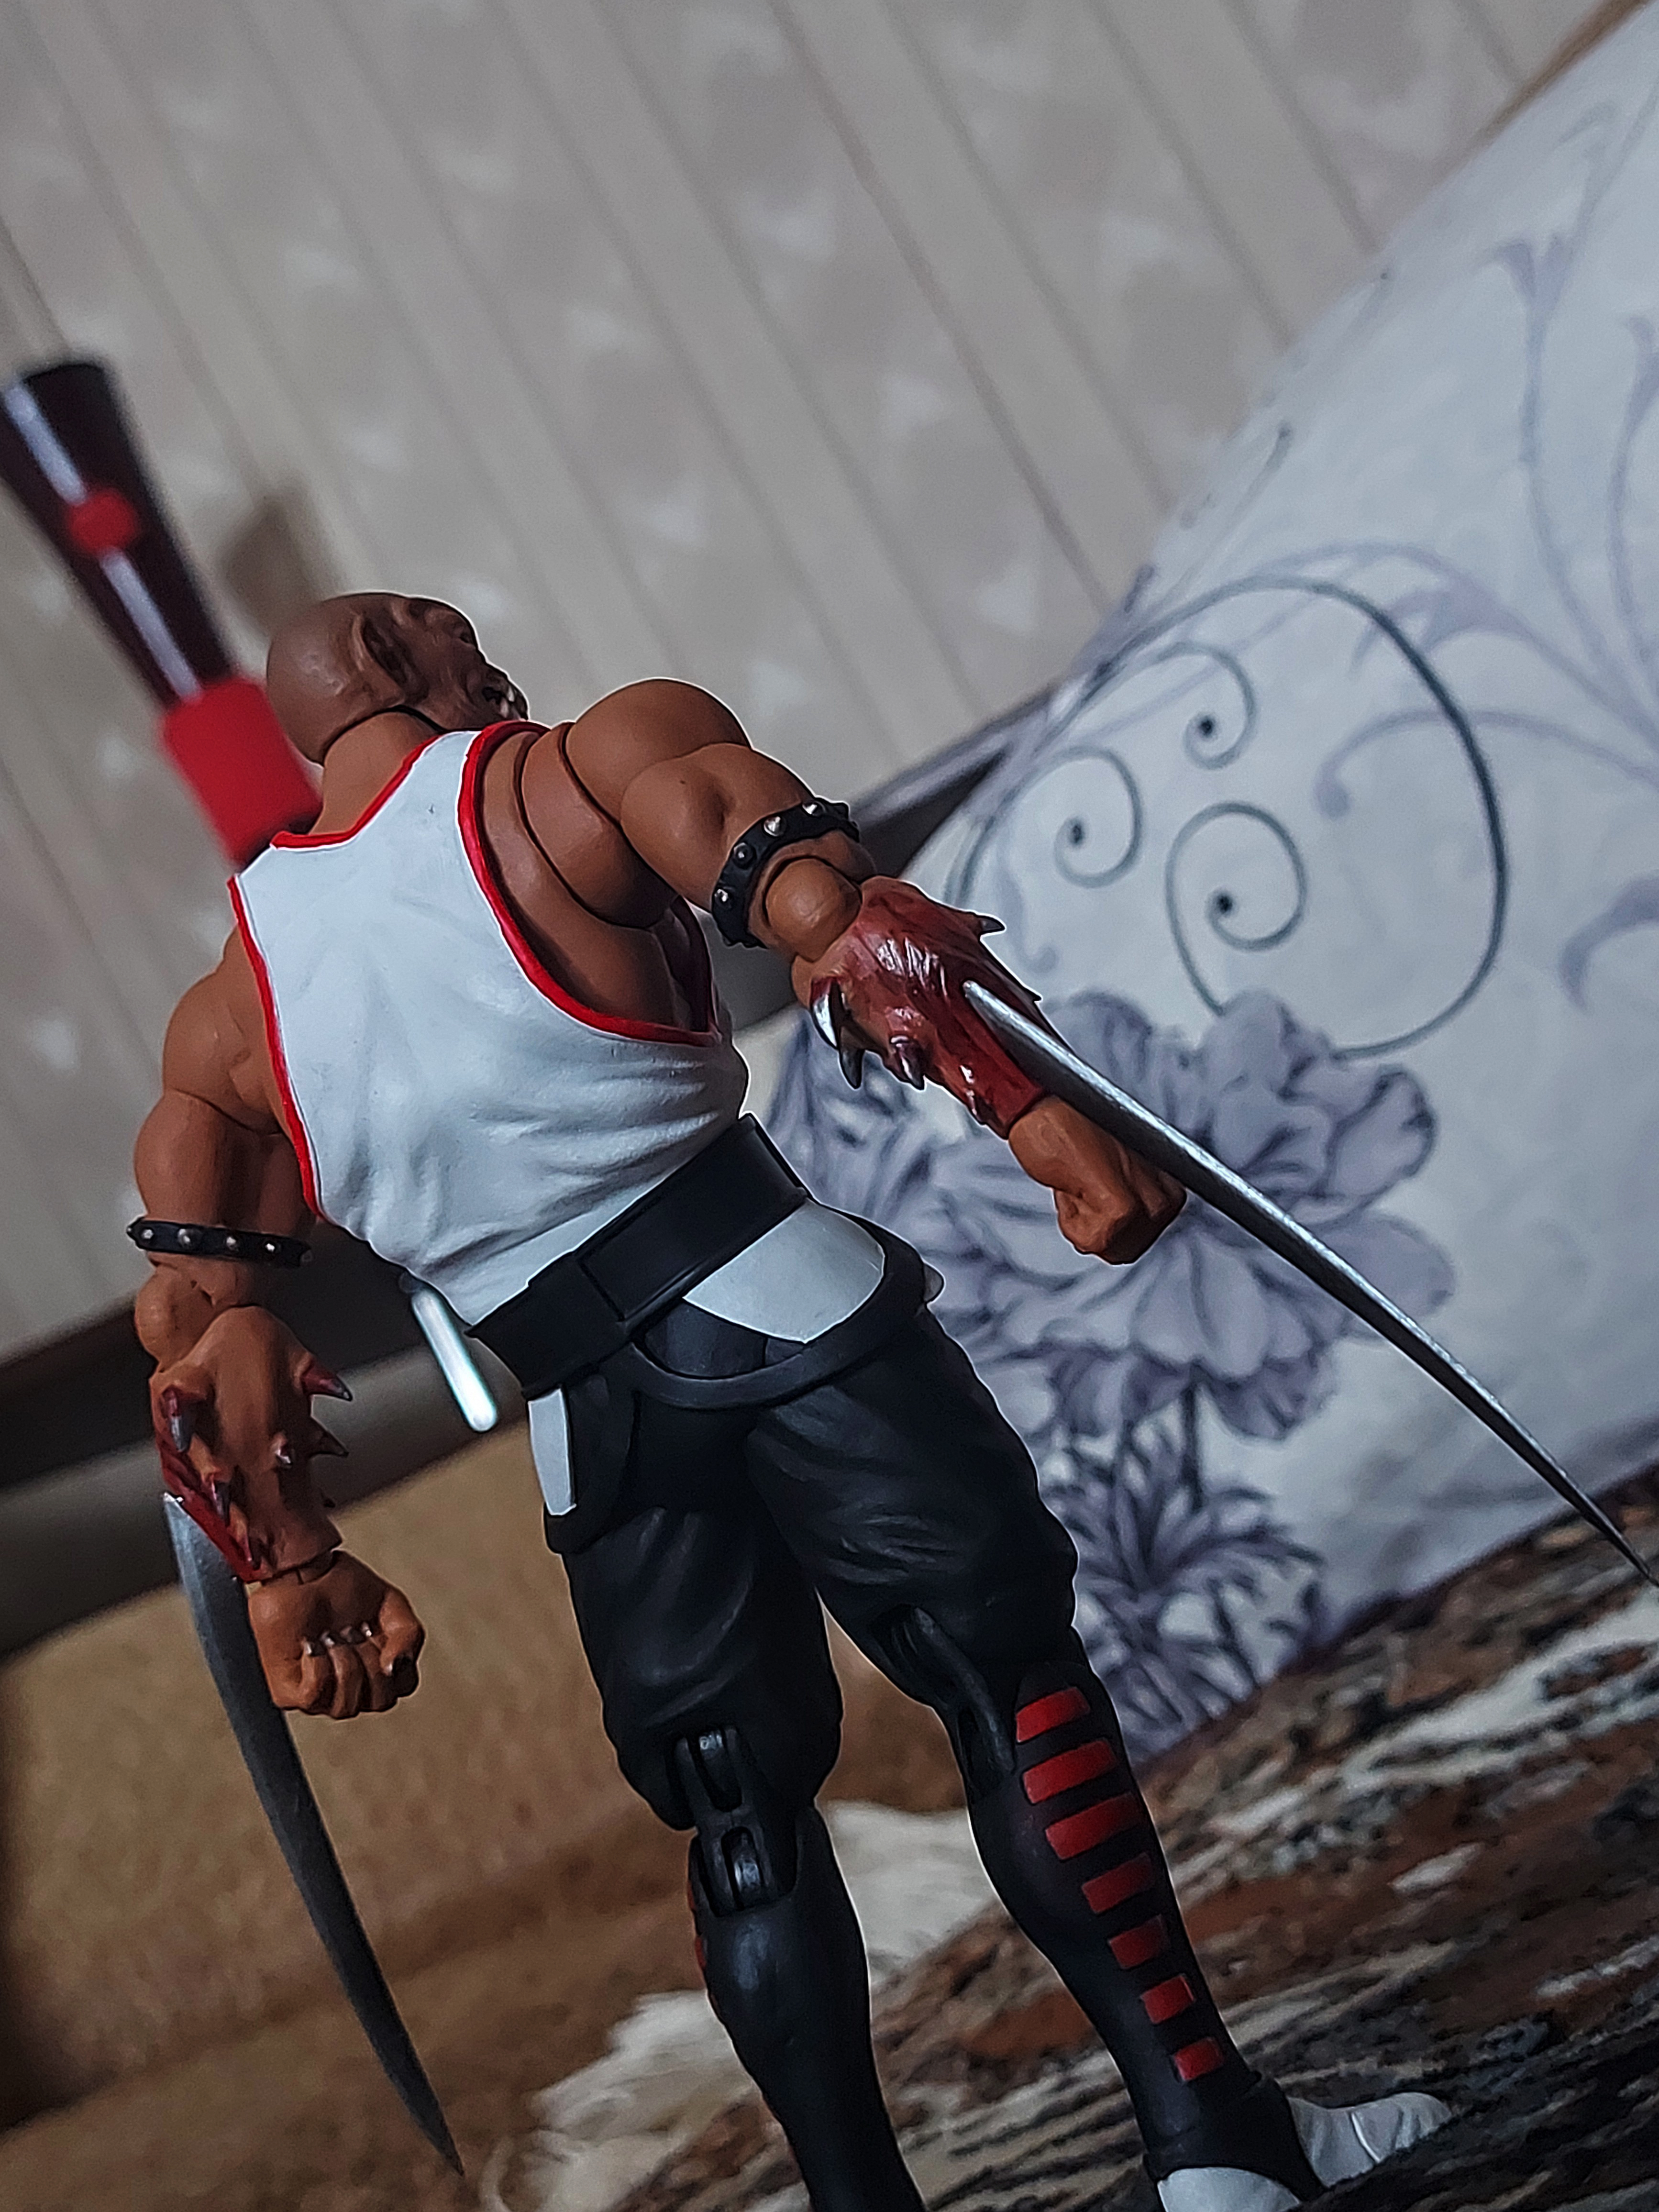 Baraka action figure from Storm Collectibles. by ActionFigure3453